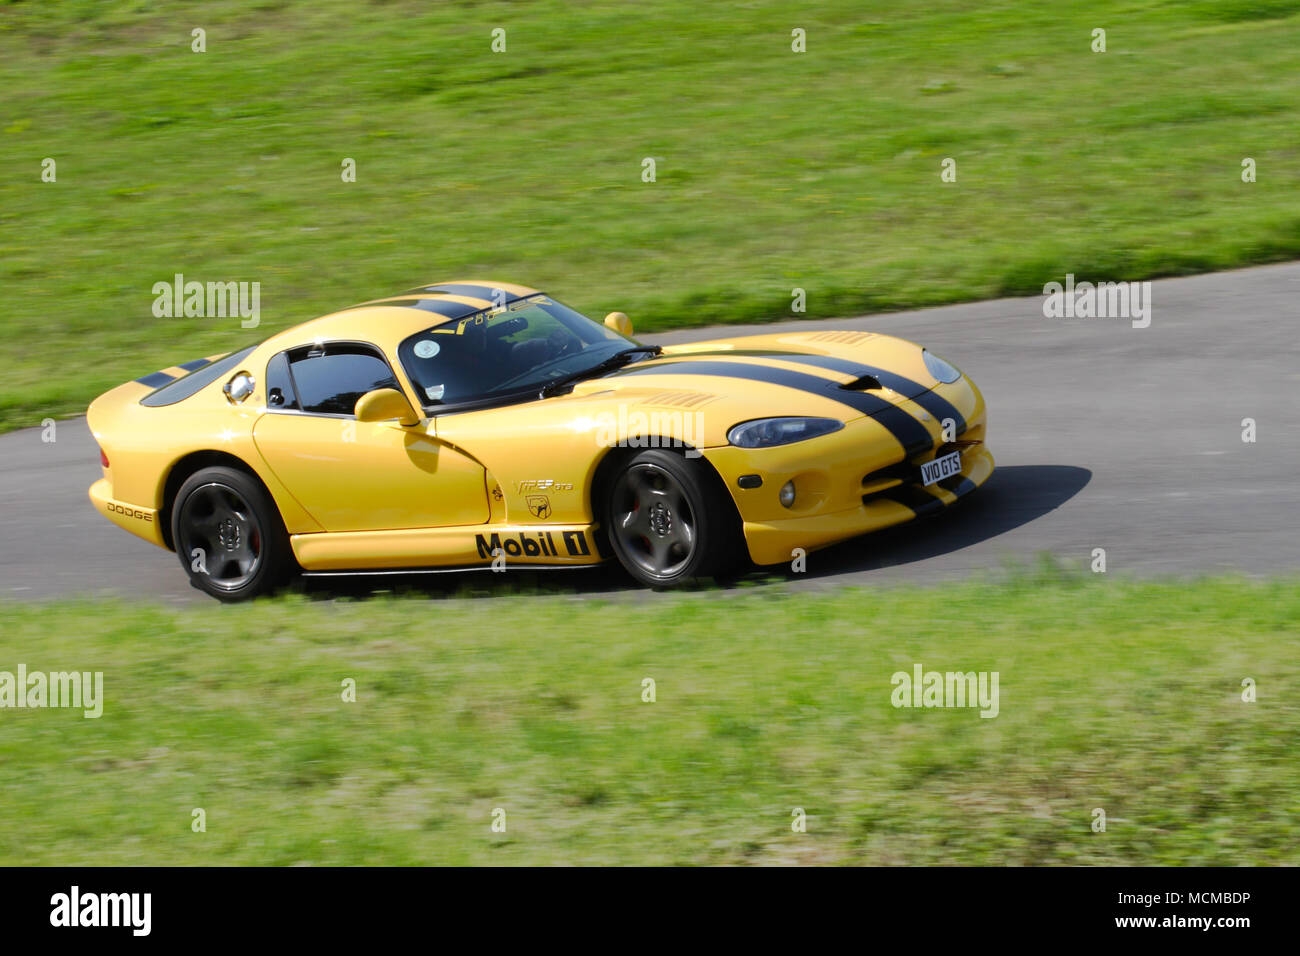 Yellow Dodge Viper American sports car with black racing stripes driving fast. Stock Photo